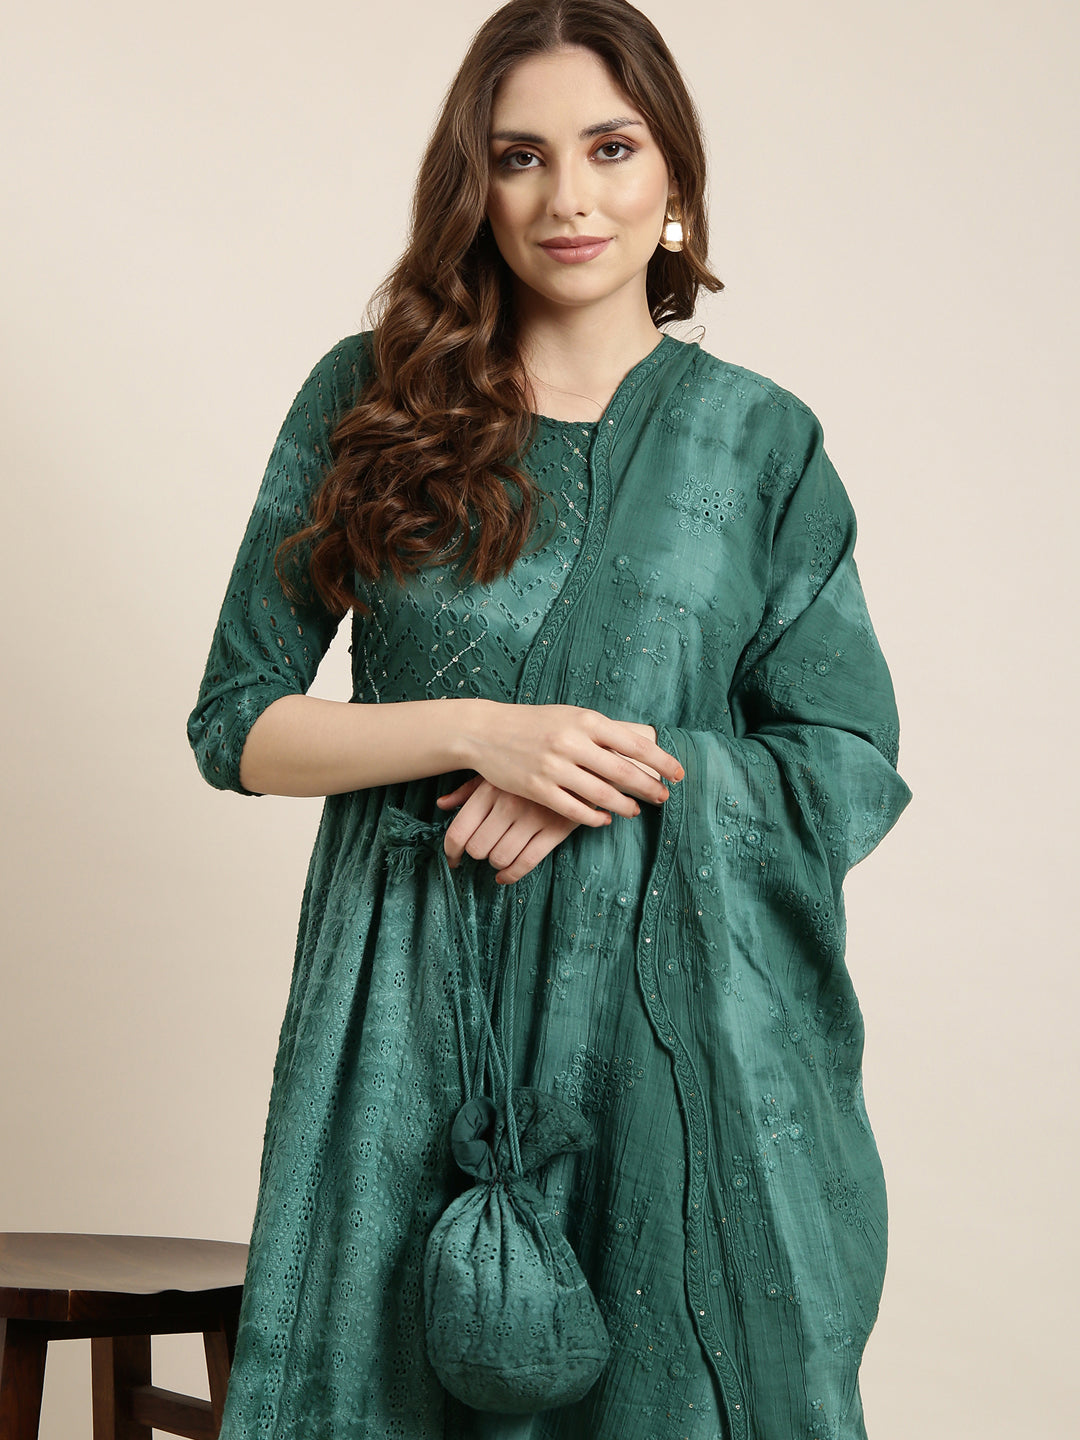 Women A-Line Sea Green Ombre Kurta and Trousers Set Comes With Dupatta and Potli Bag